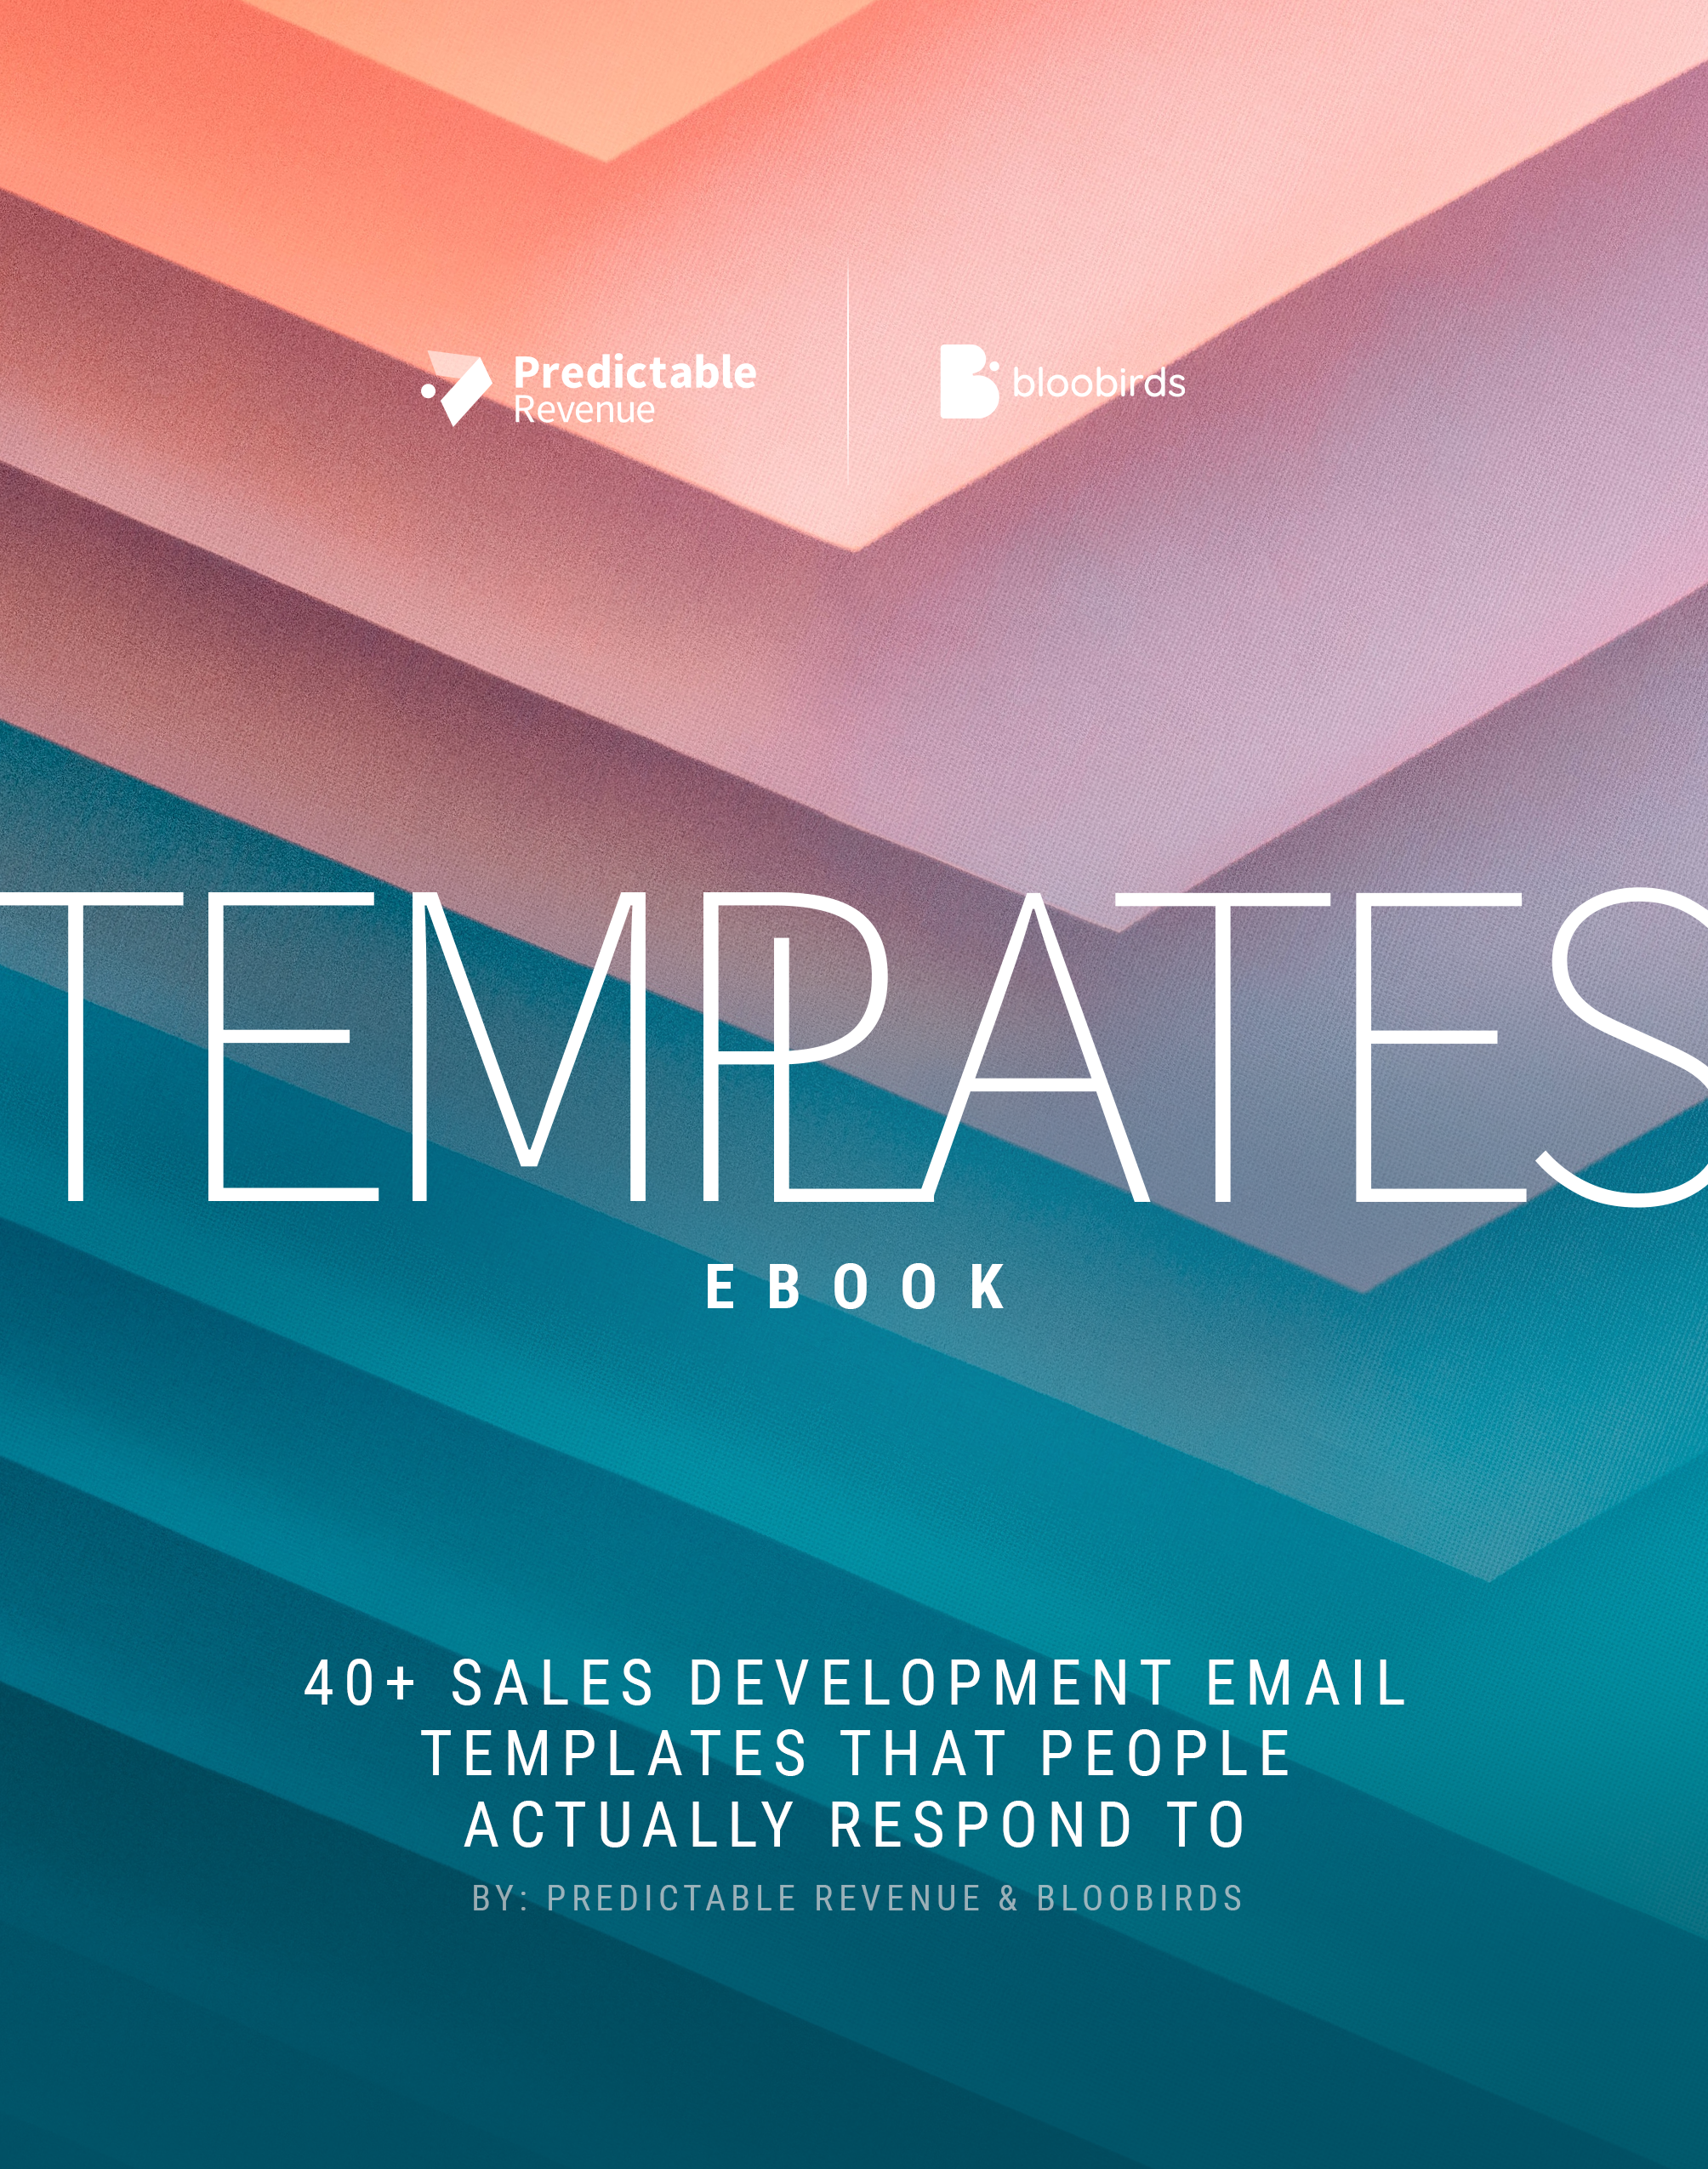 40+ Sales Development Email Templates That People Actually Respond To